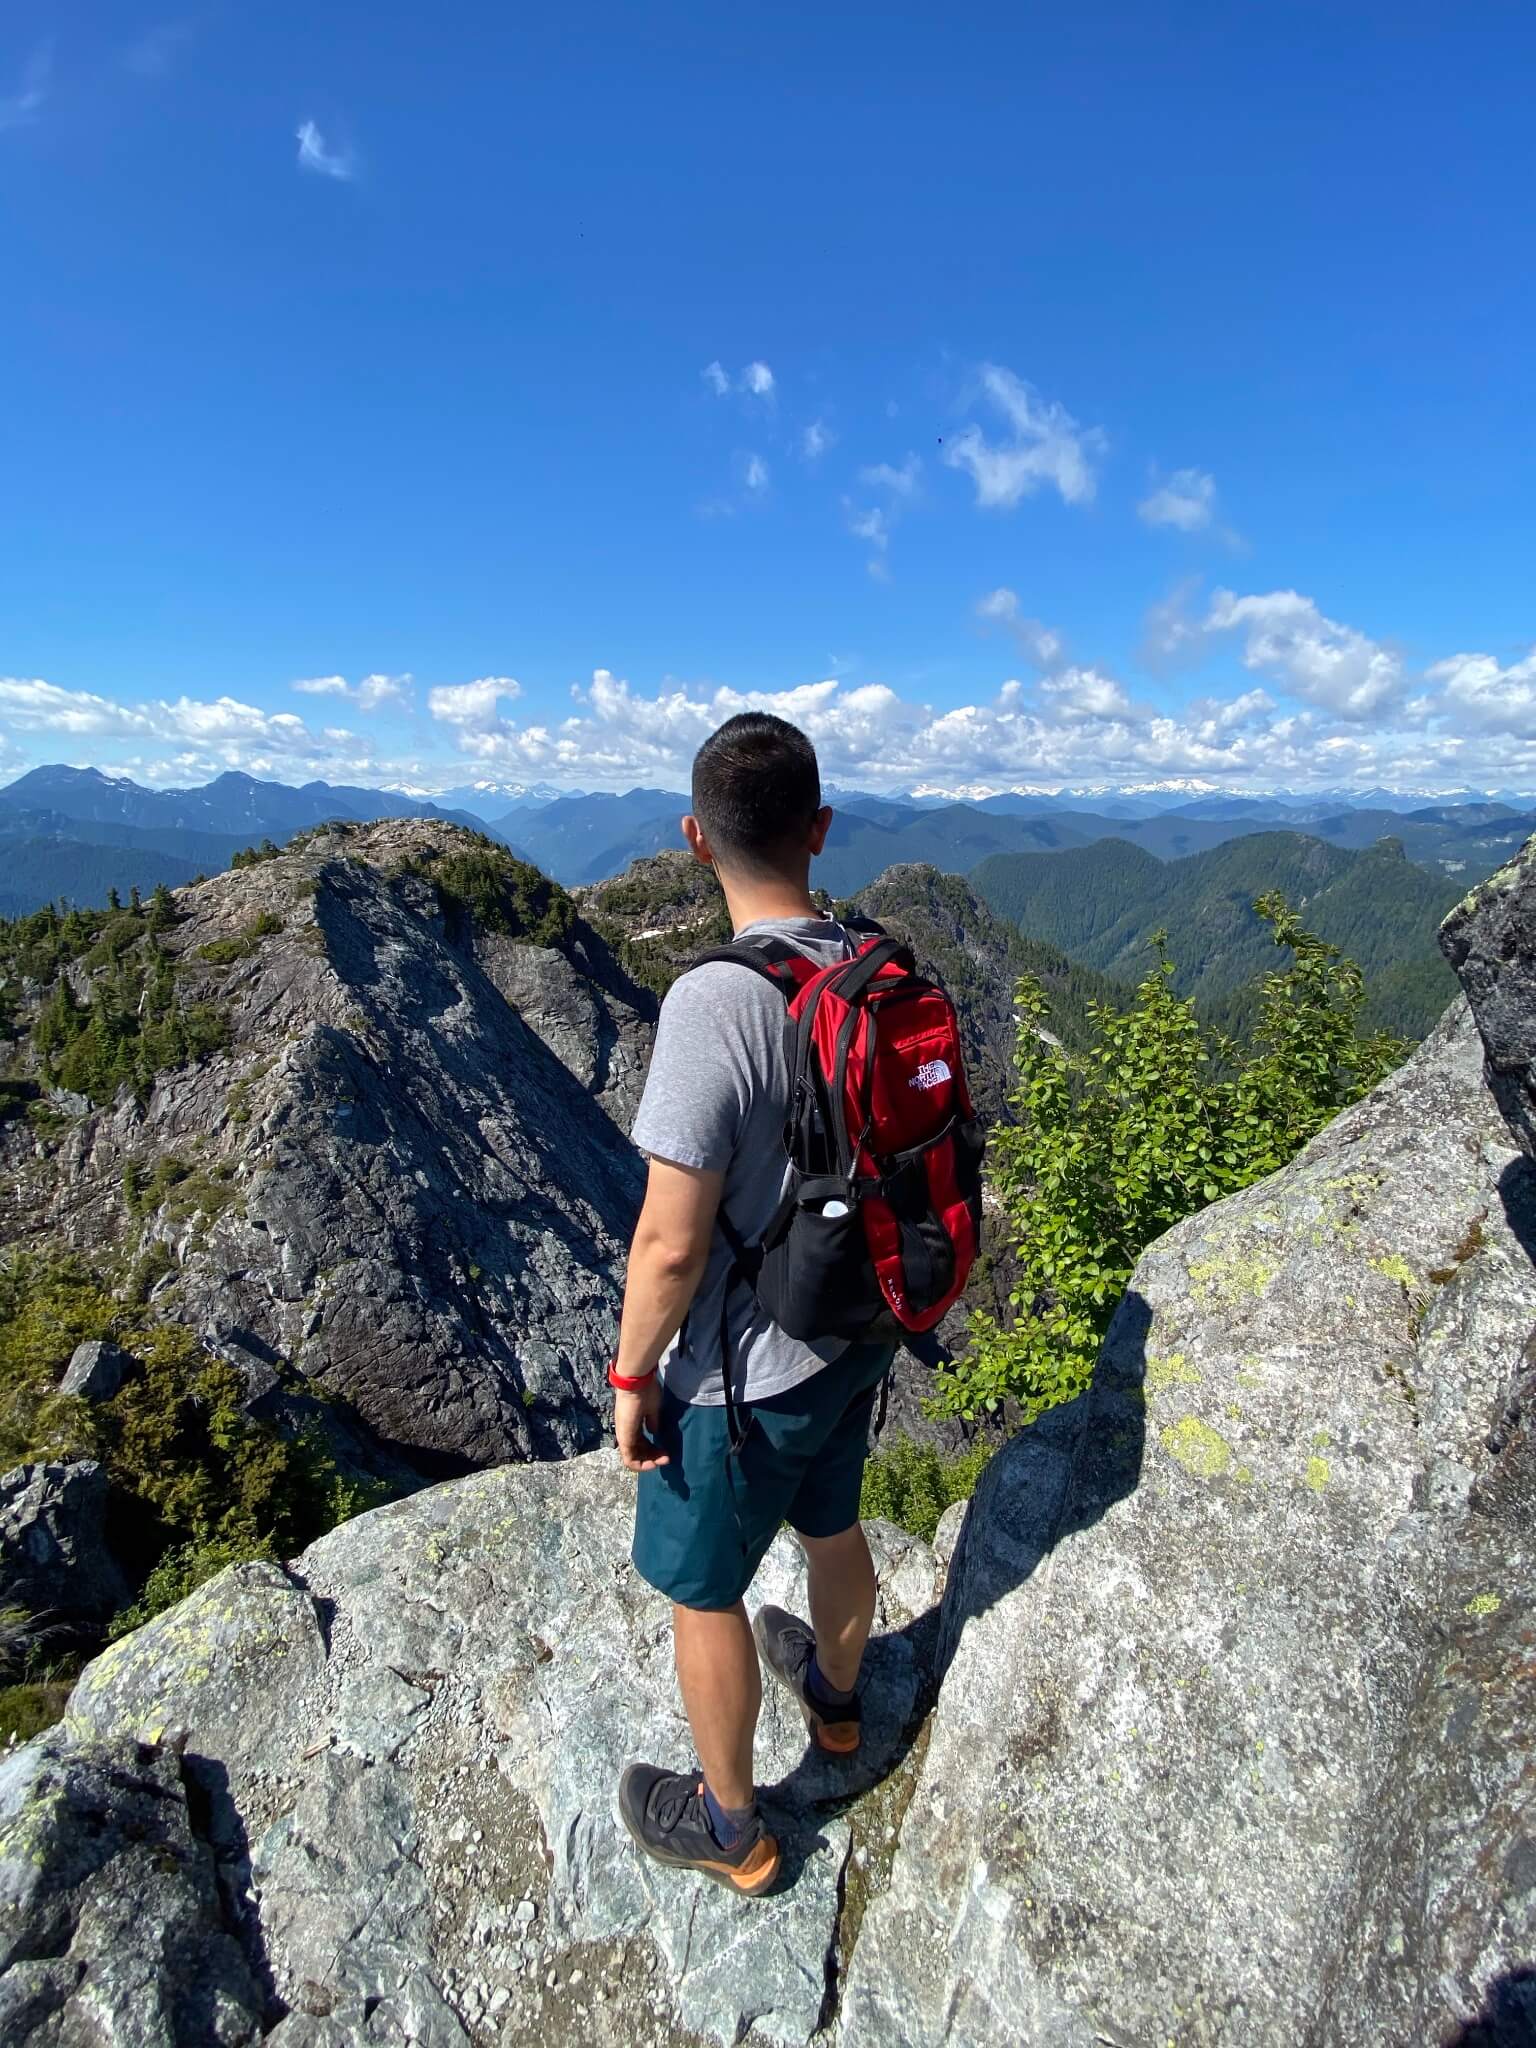 Taken at the top of Crown Mountain, with North Shore mountains in the background.